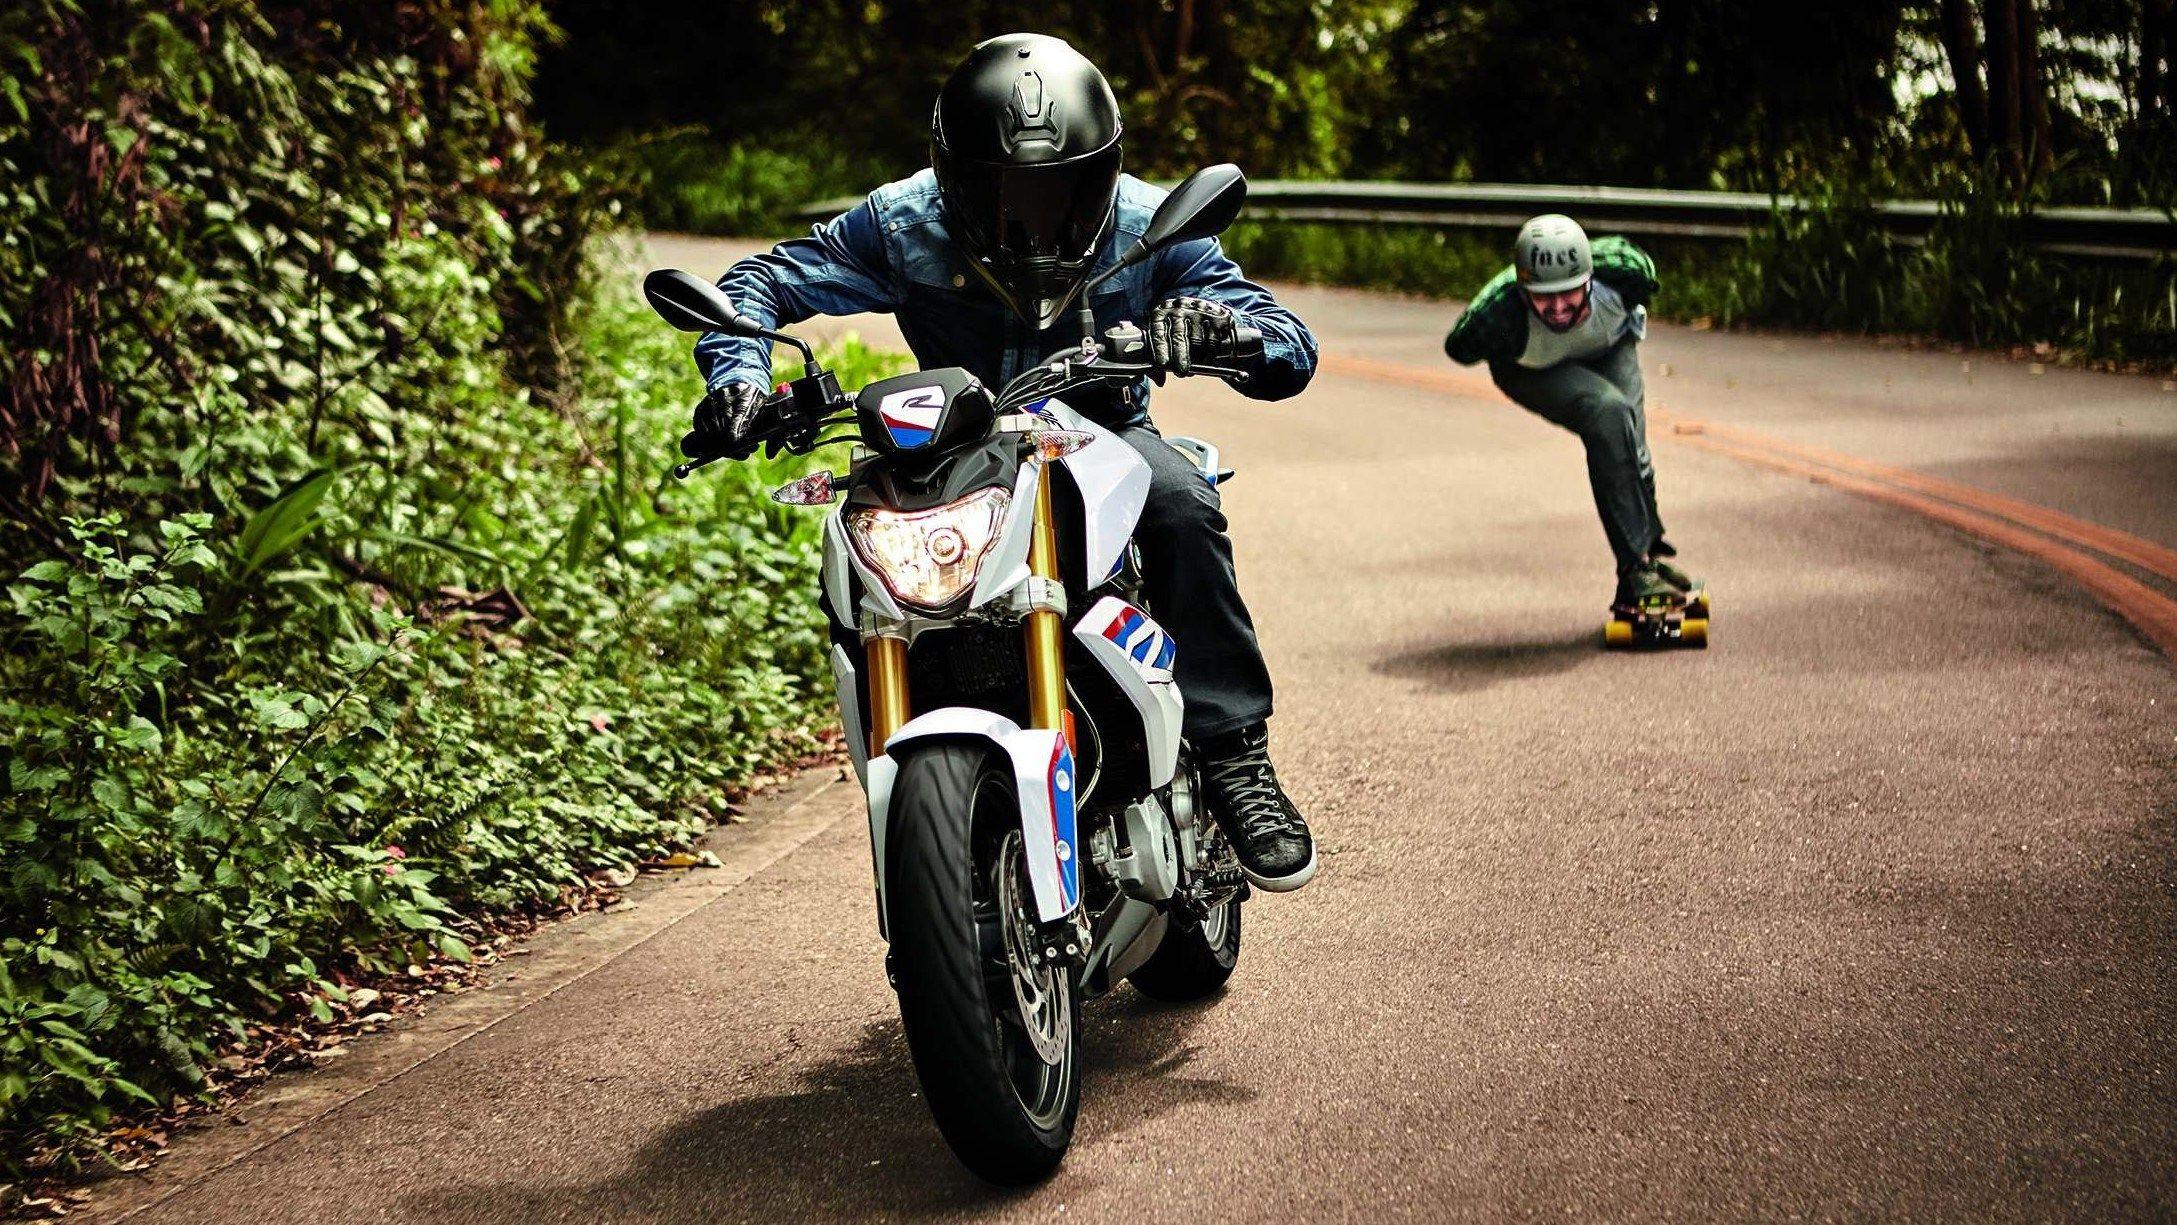 BMW G310R first promo video out. Awesomest Vehicles In